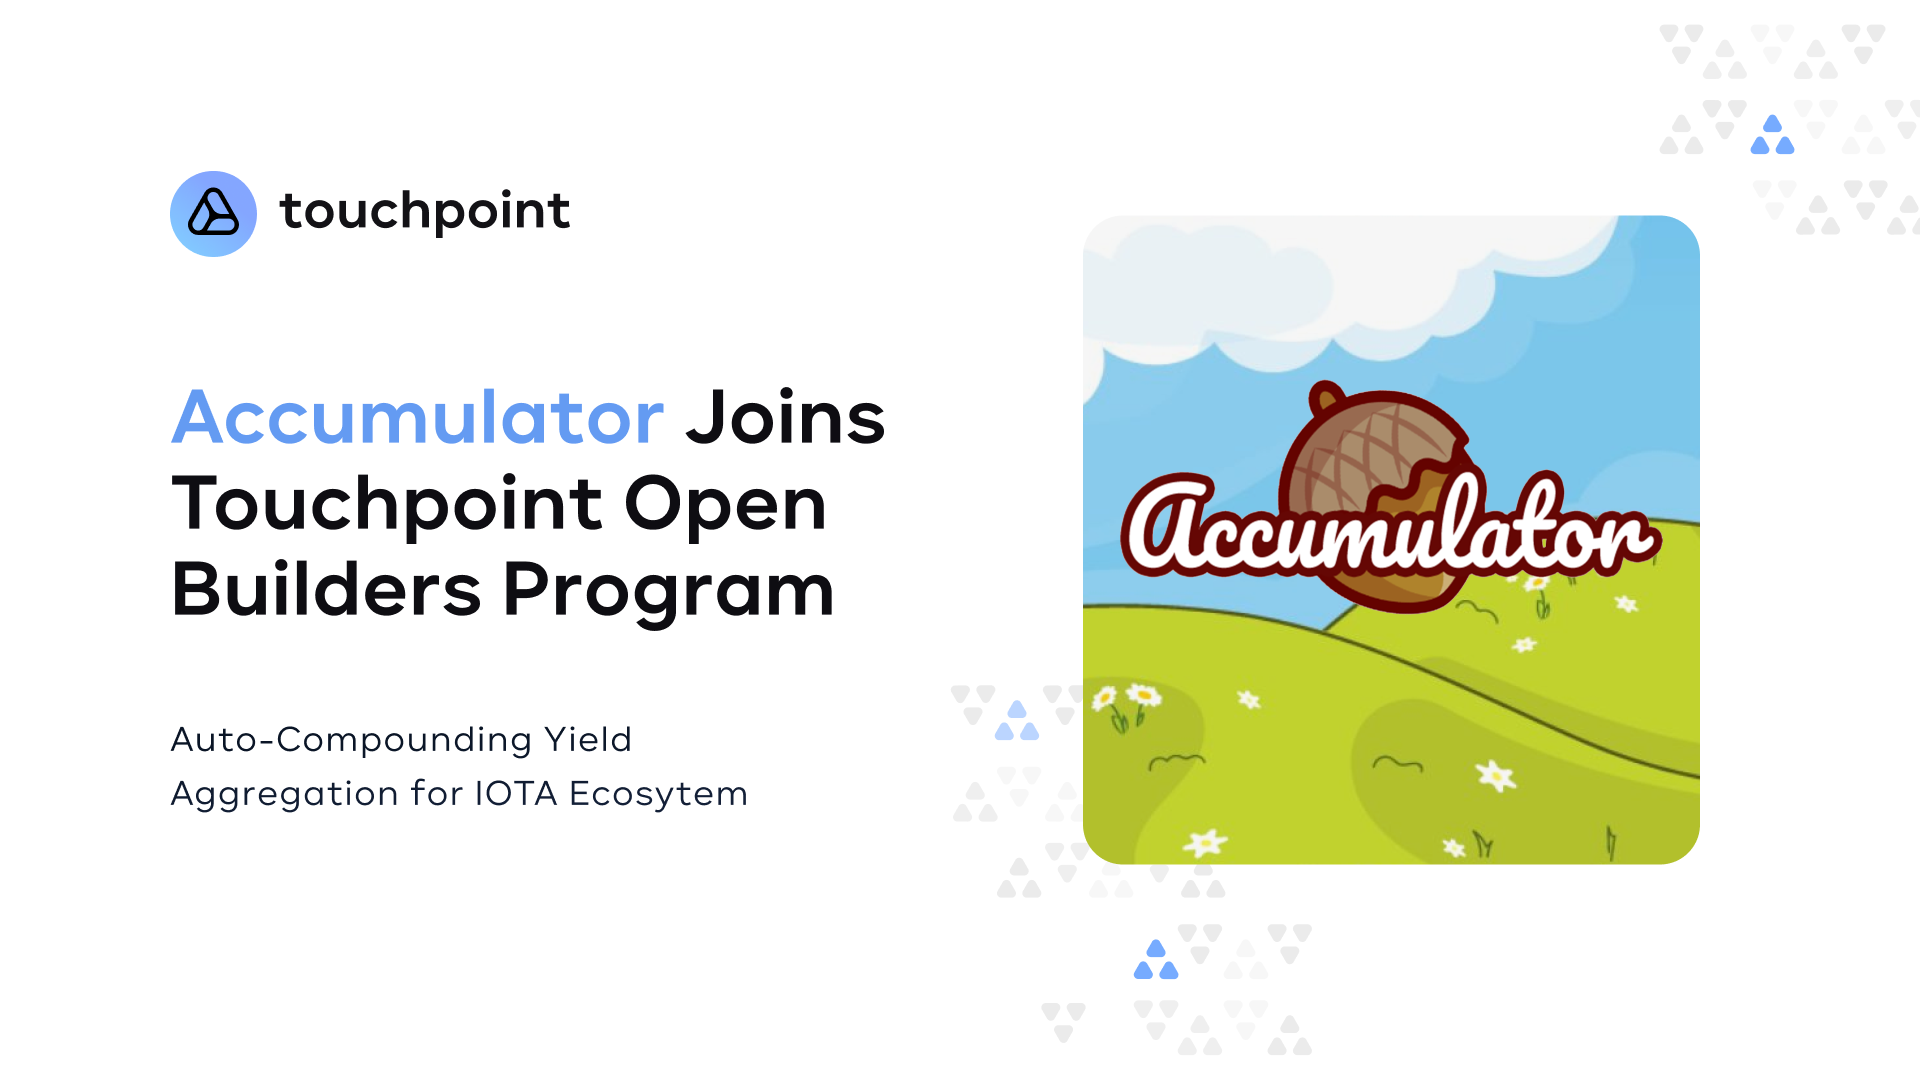 Accumulator Joins the Touchpoint Open Builders Program